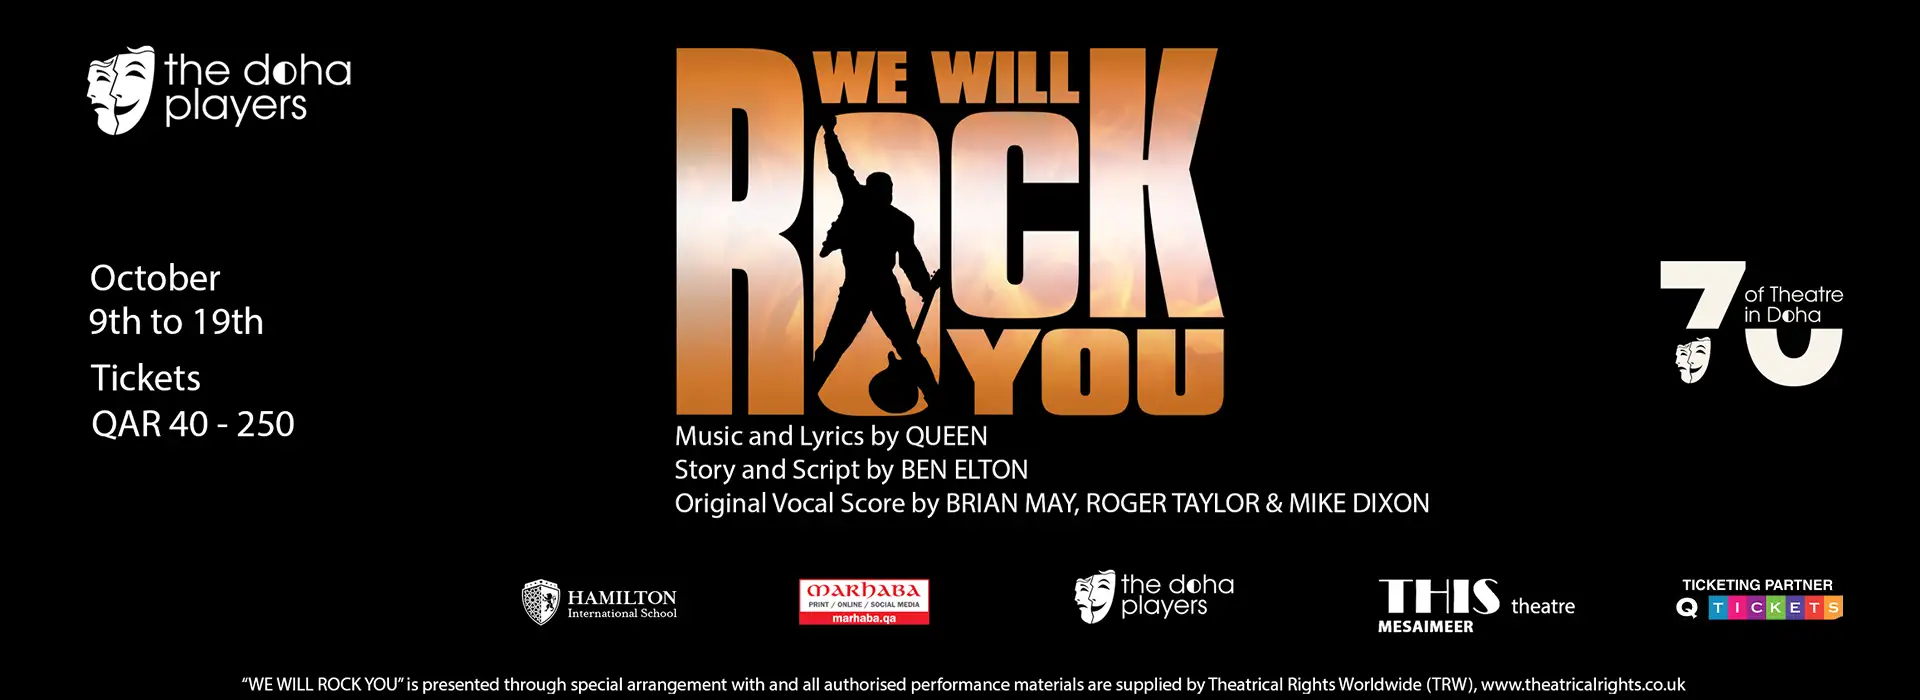 We Will Rock You – the Queen musical